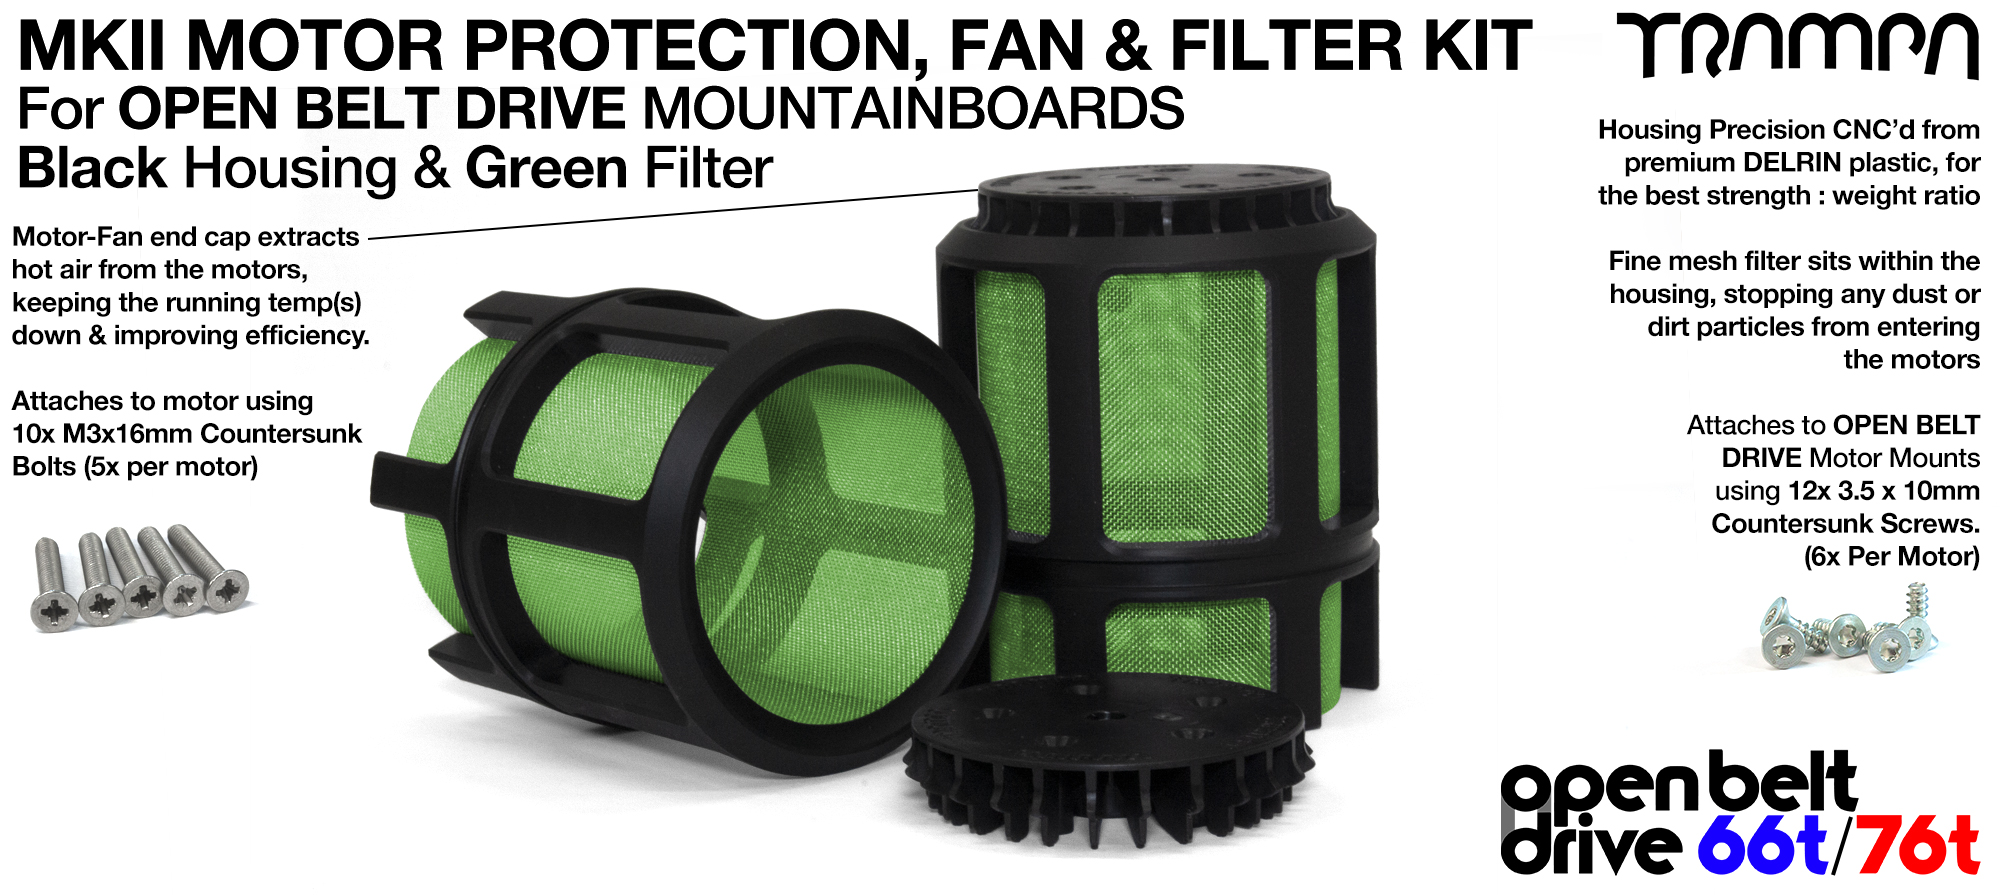 2x OBD MKII Motor protection Sleeve BLACK with GREEN Filter 